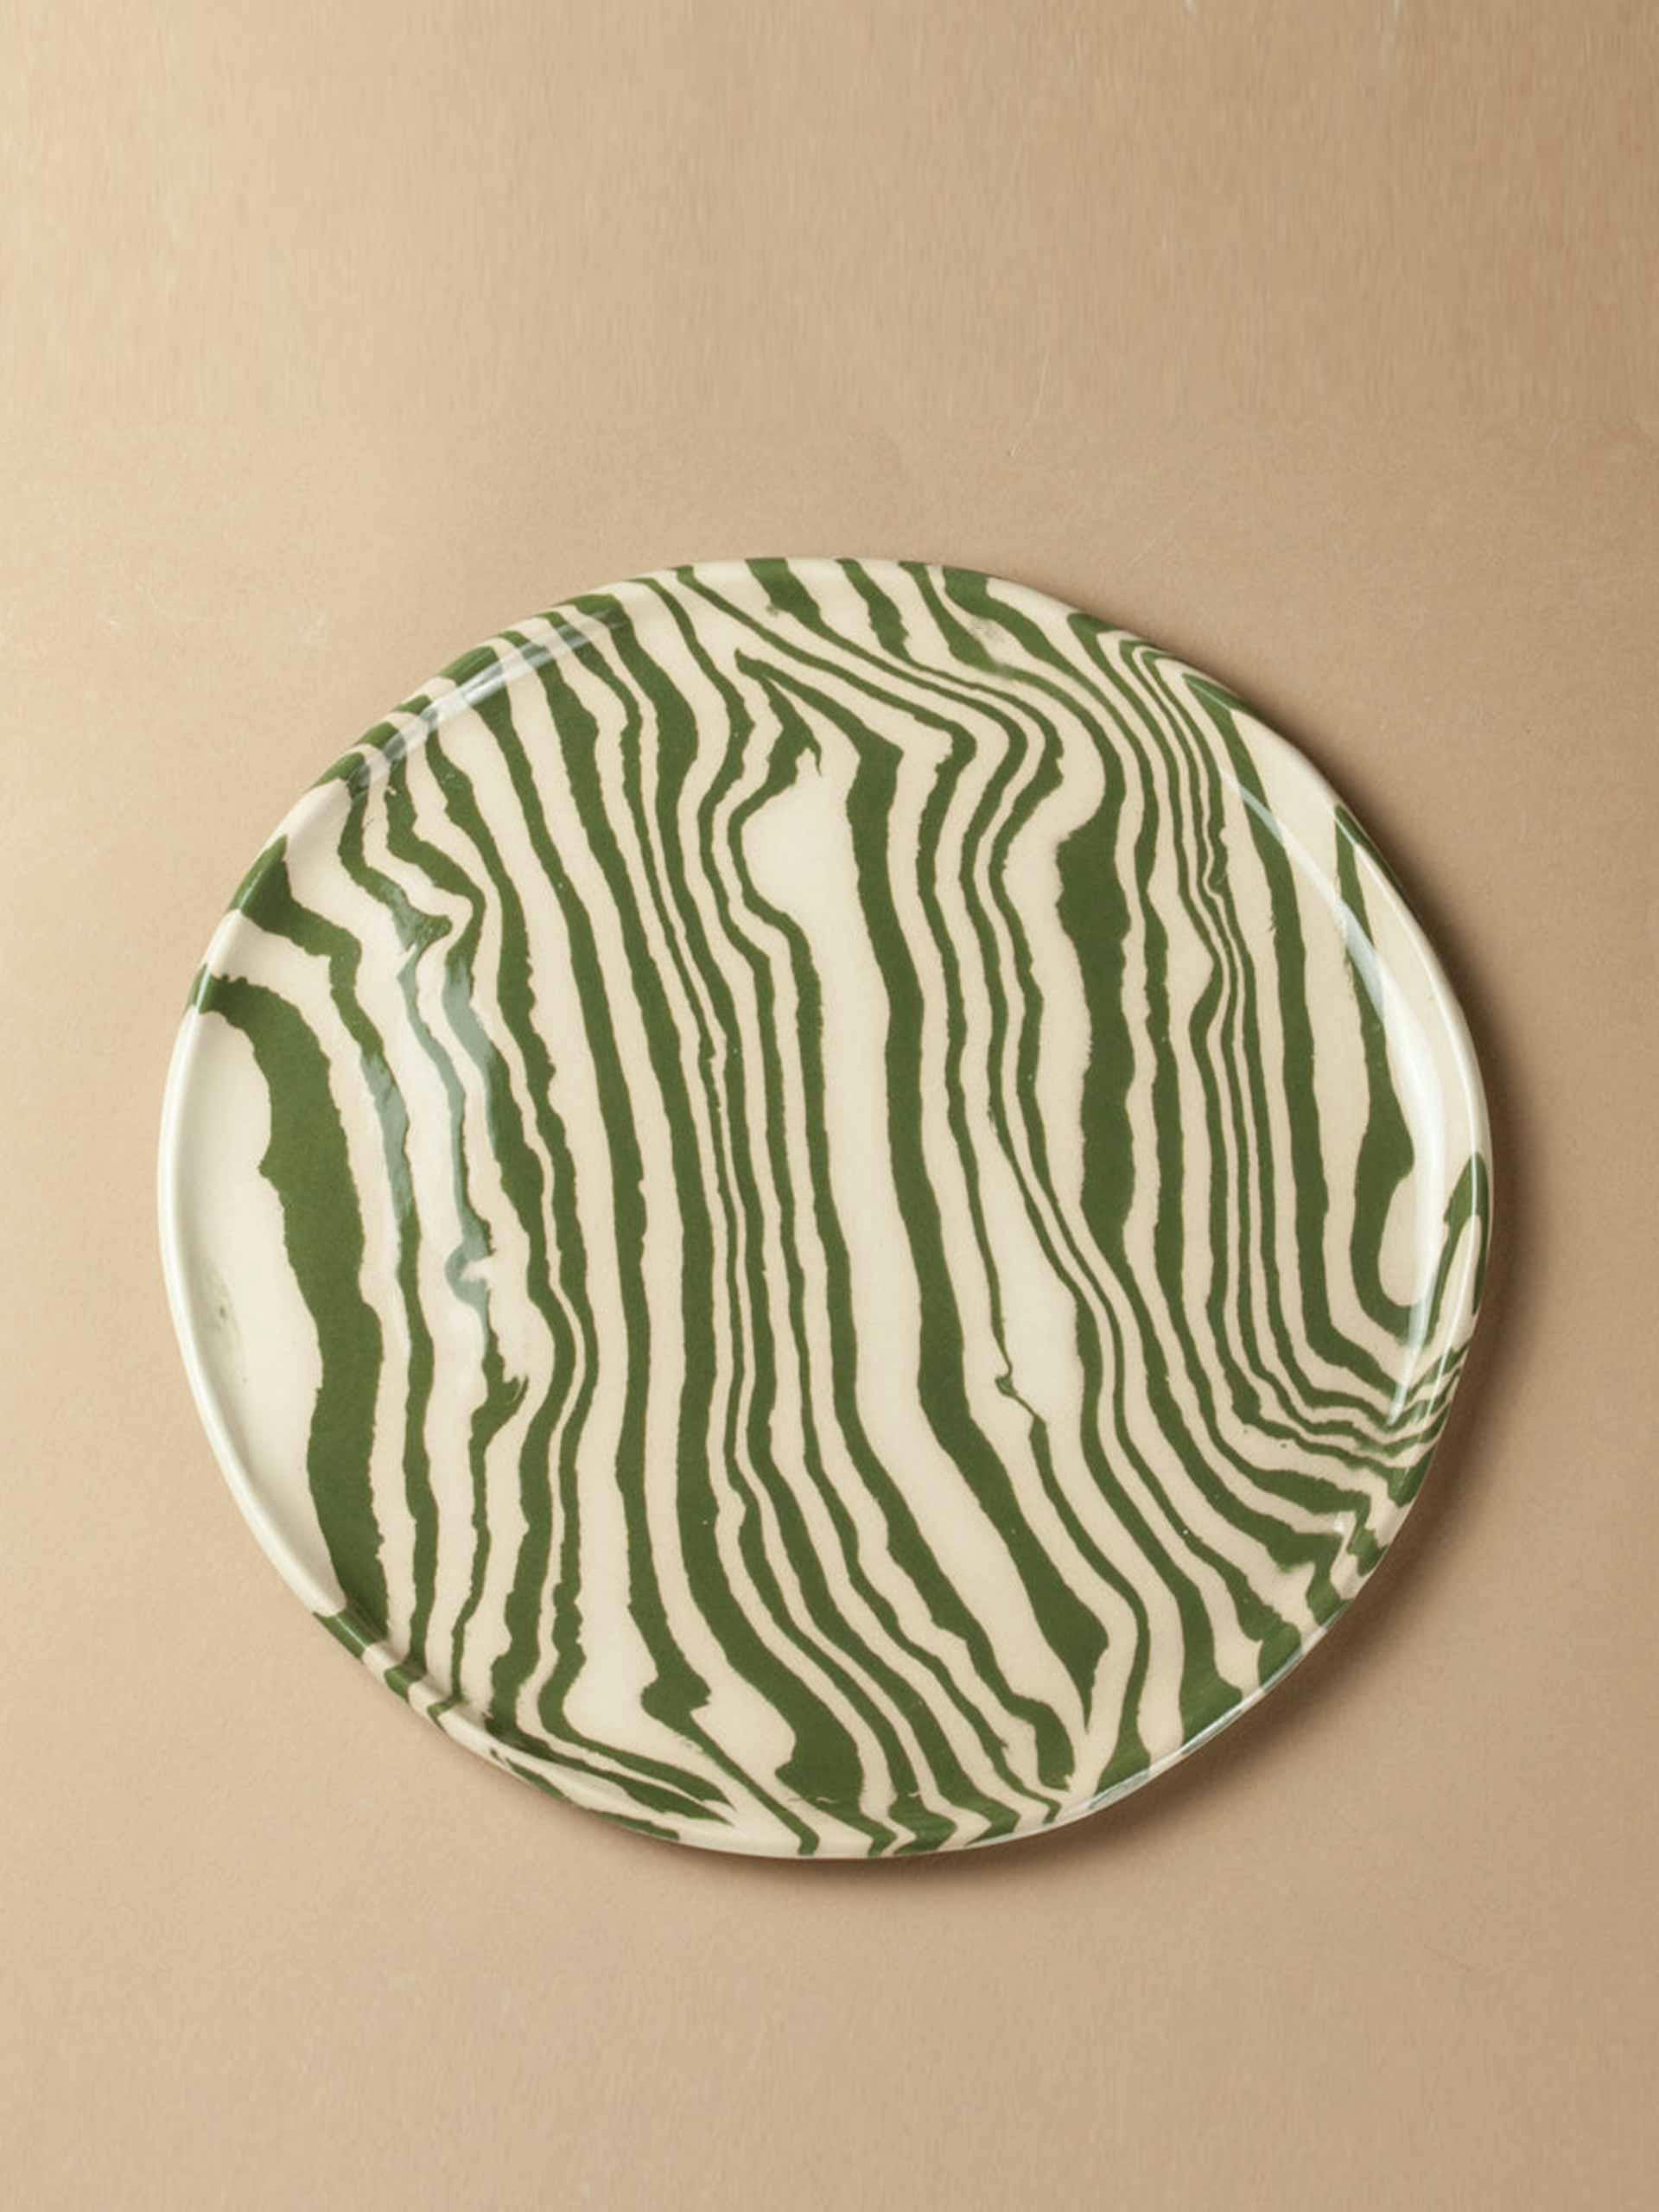 Green and white marbled plate